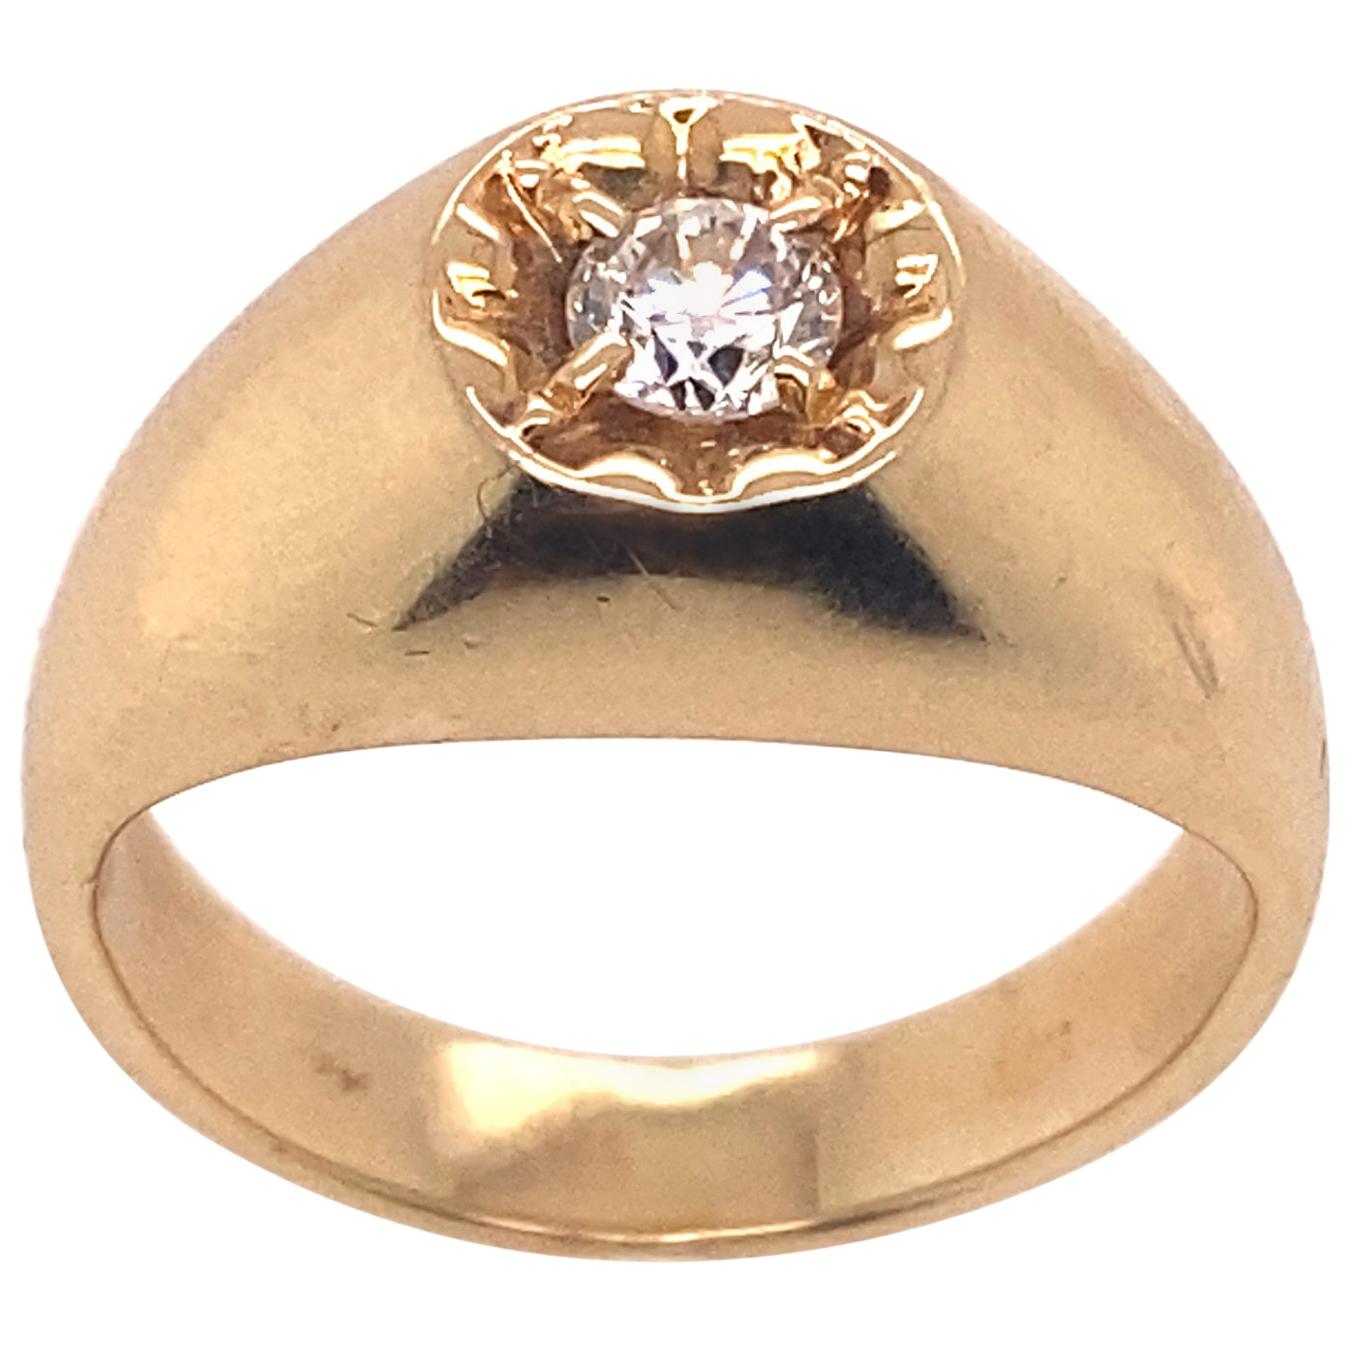 Ethonica Solitaire Diamond Ring in 14 Karat Gold For Sale